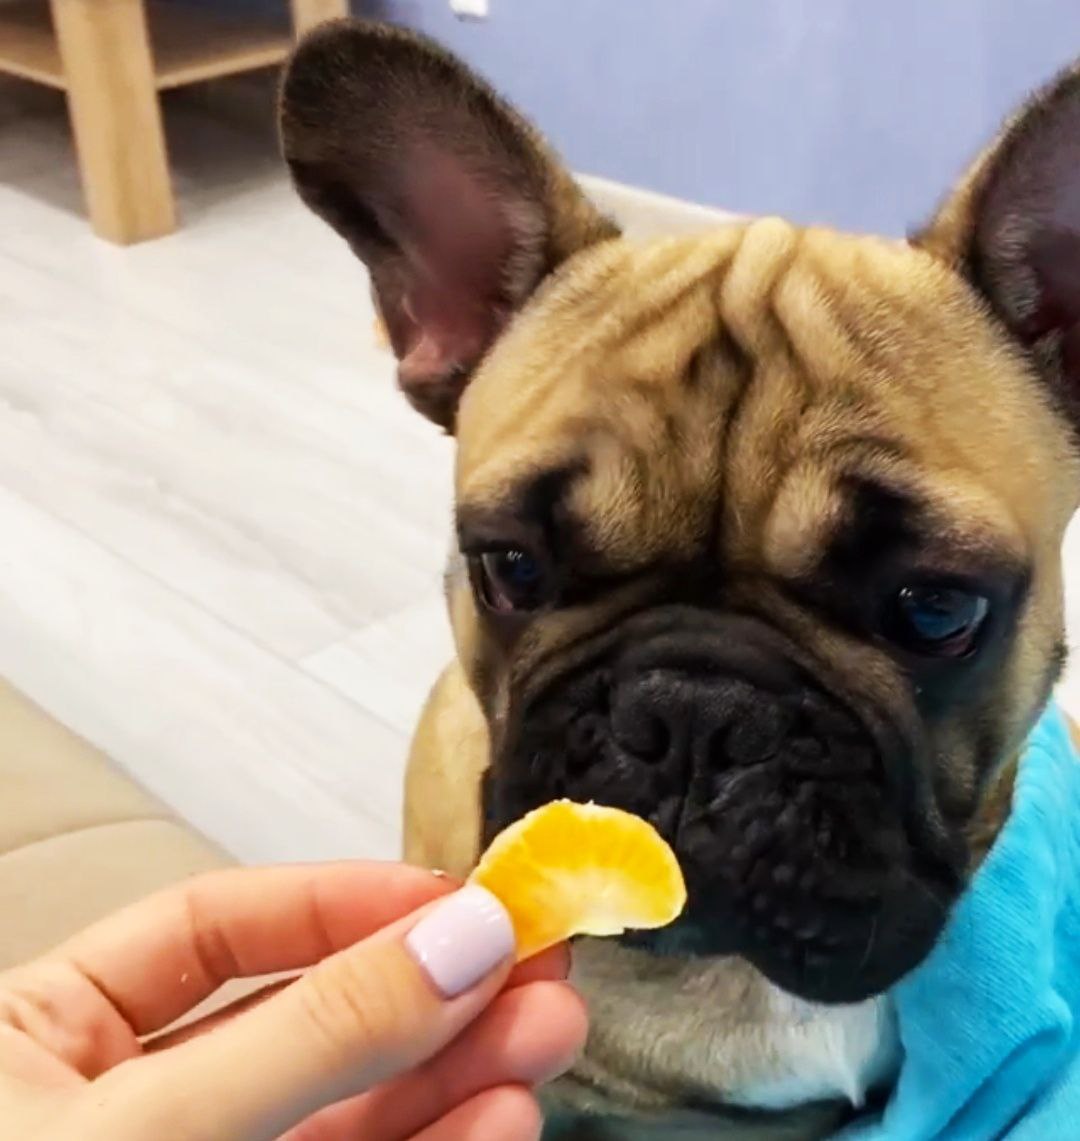 Can French Bulldogs have tangerines?